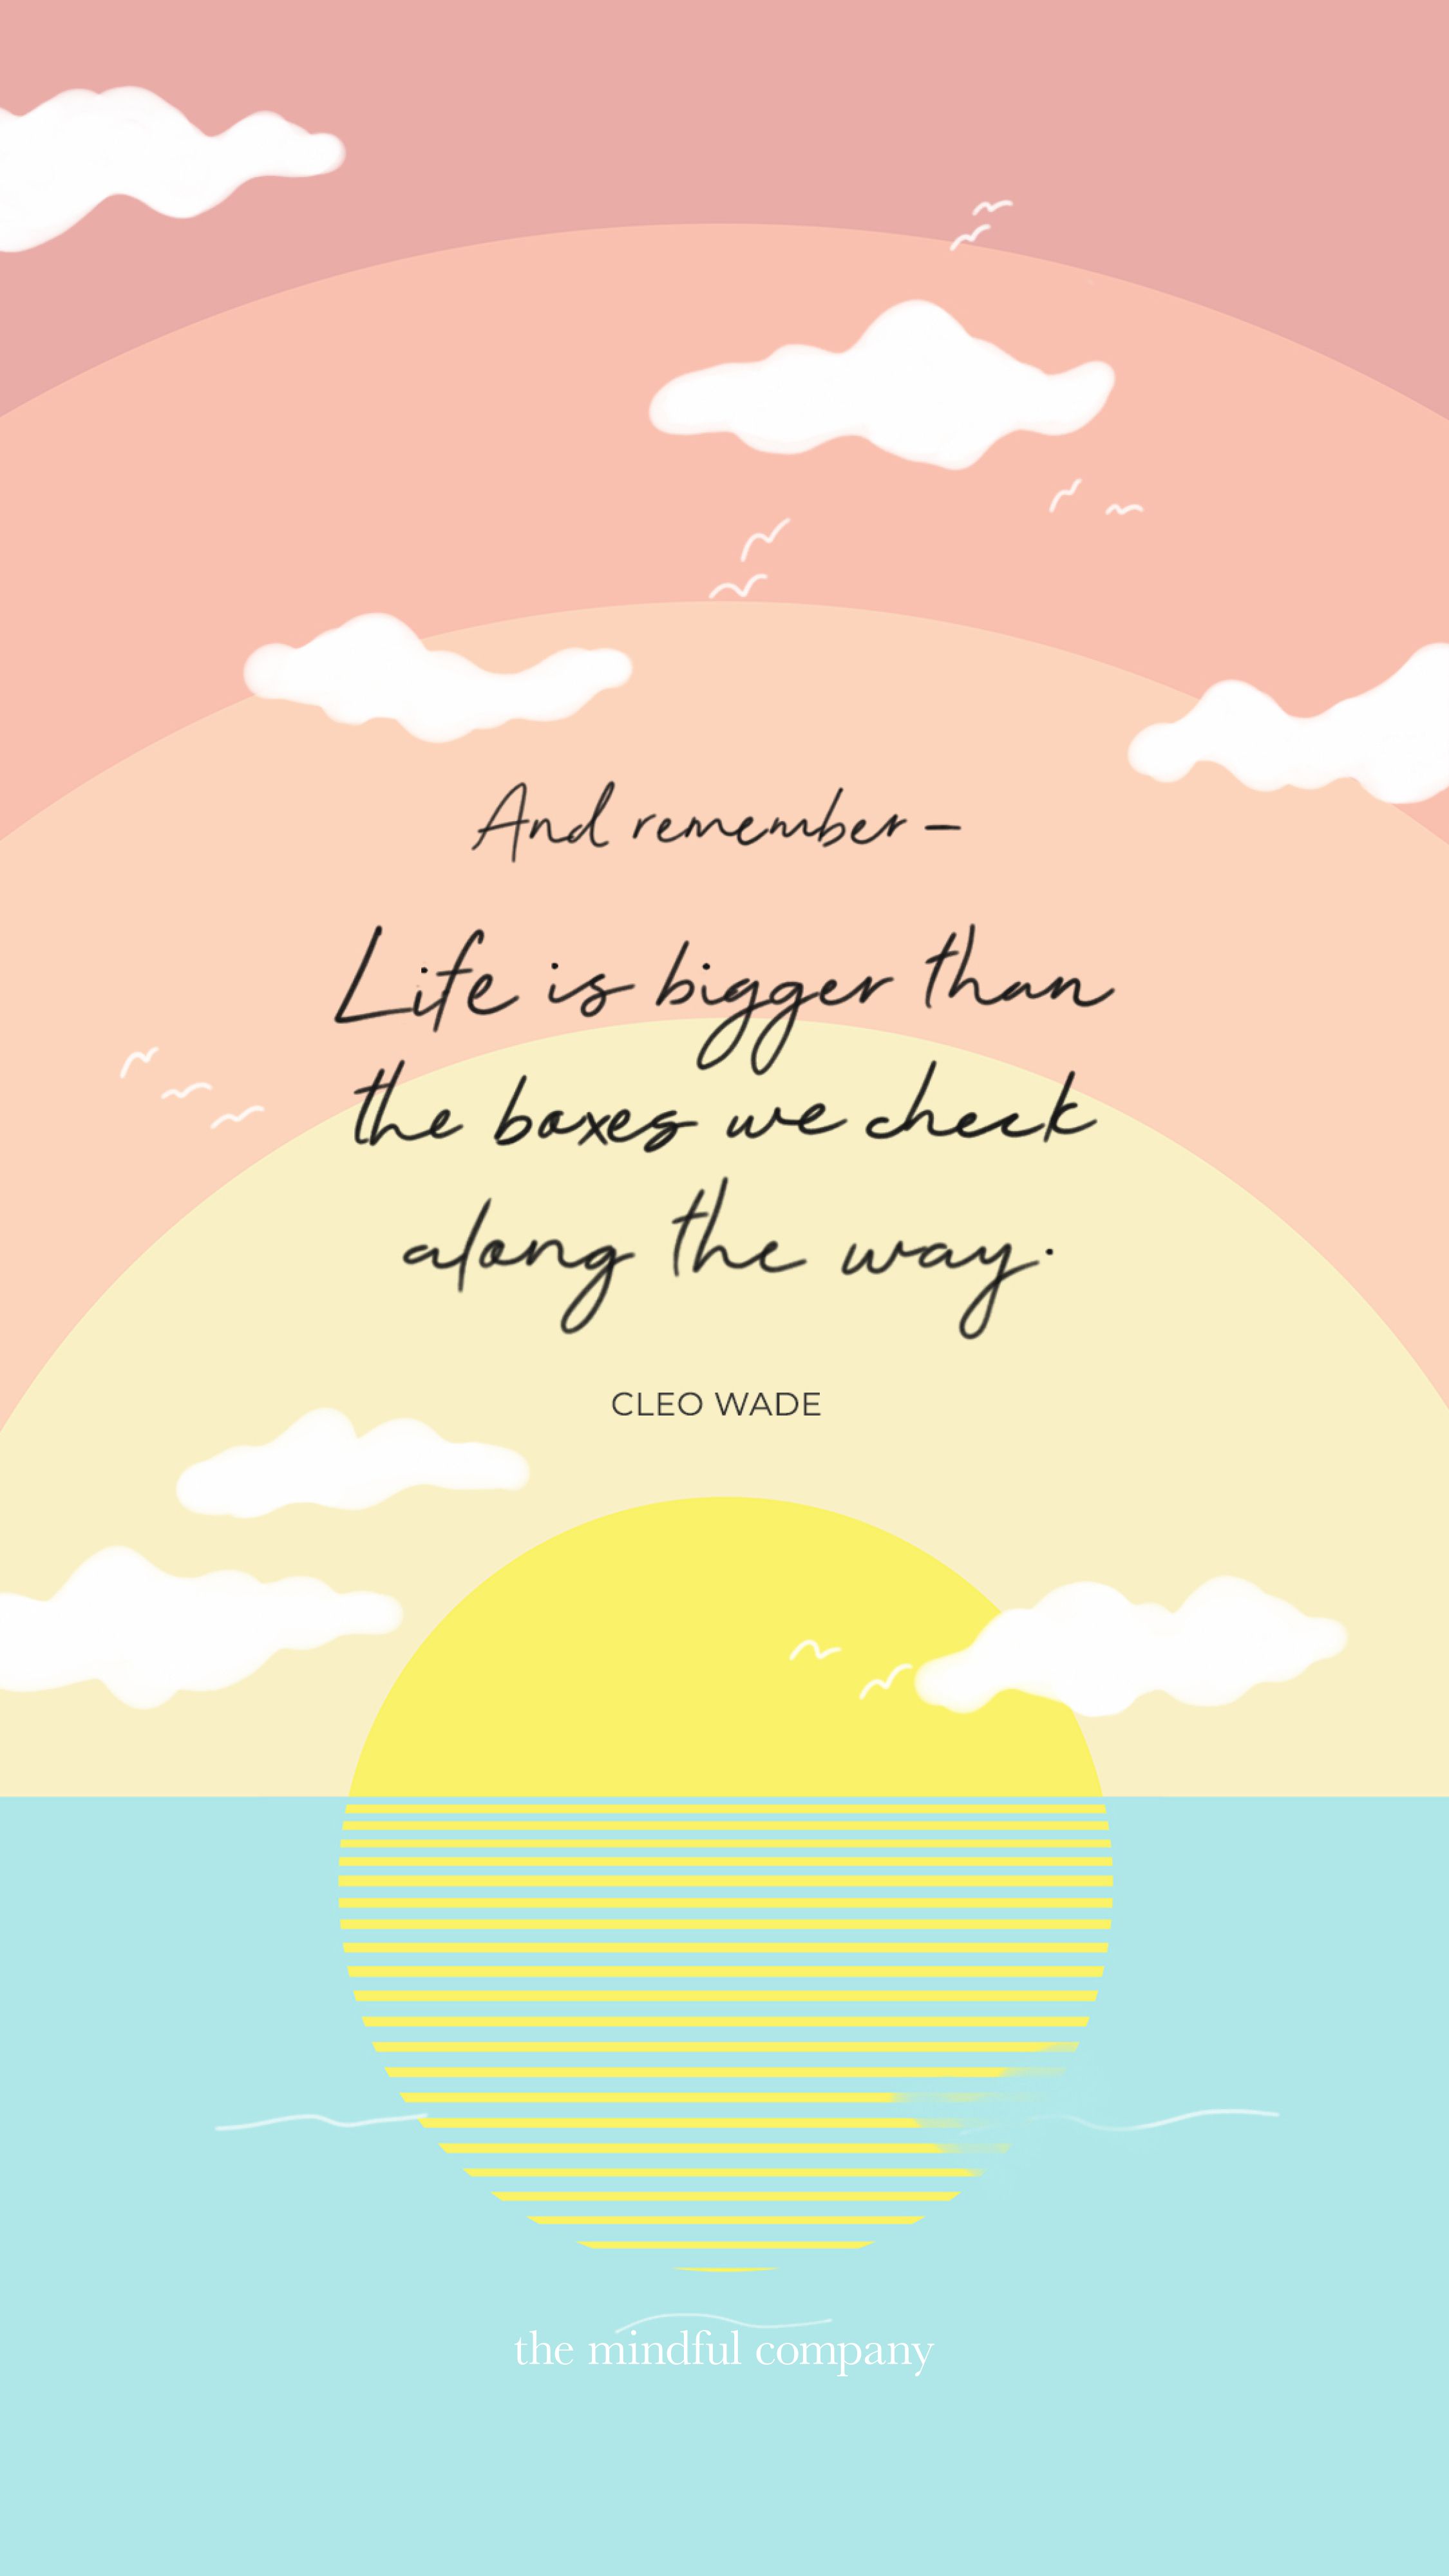 Wallpaper Of The Month Cleo Wade Quotes Motivational